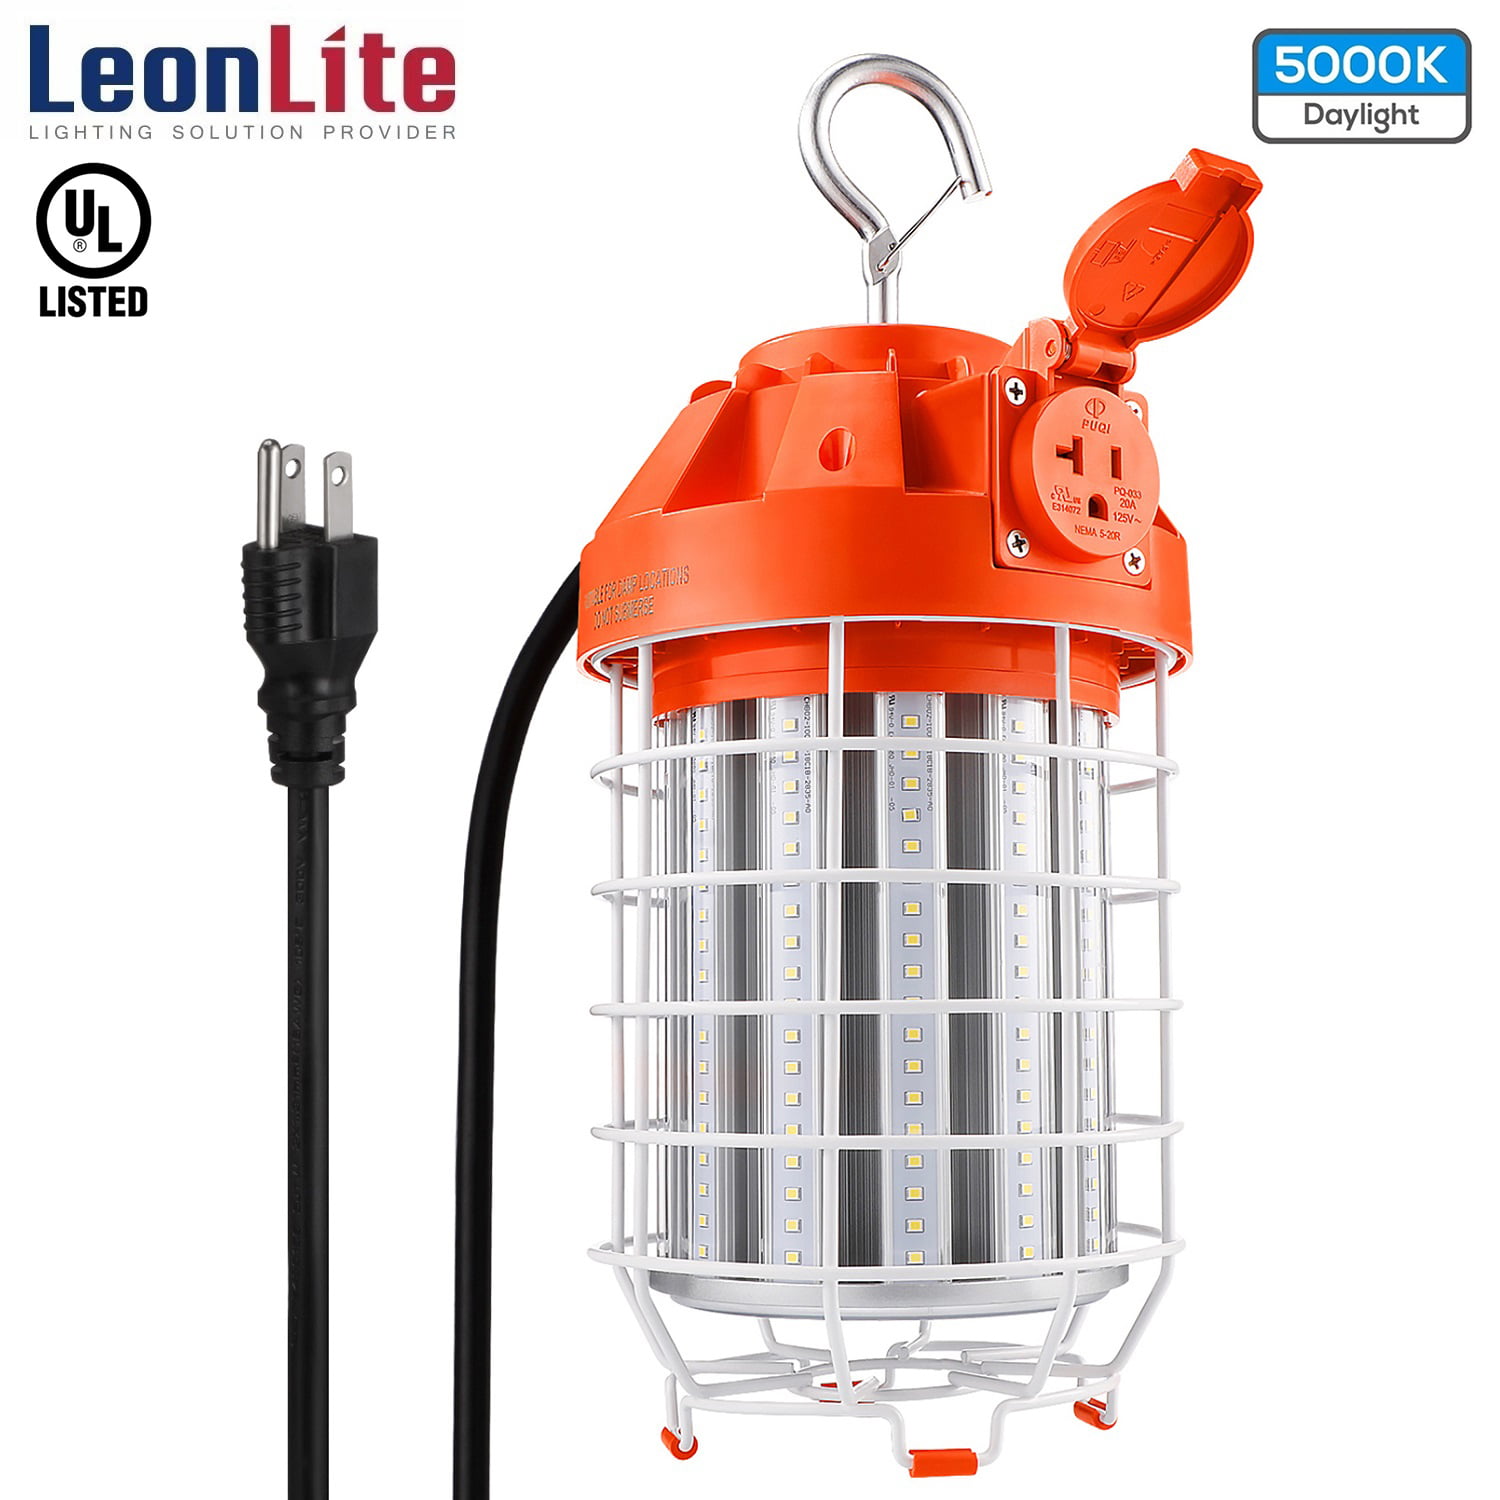 100W LED Temporary Construction Hanging Work Light Fixture Daylight 10400Lm US 